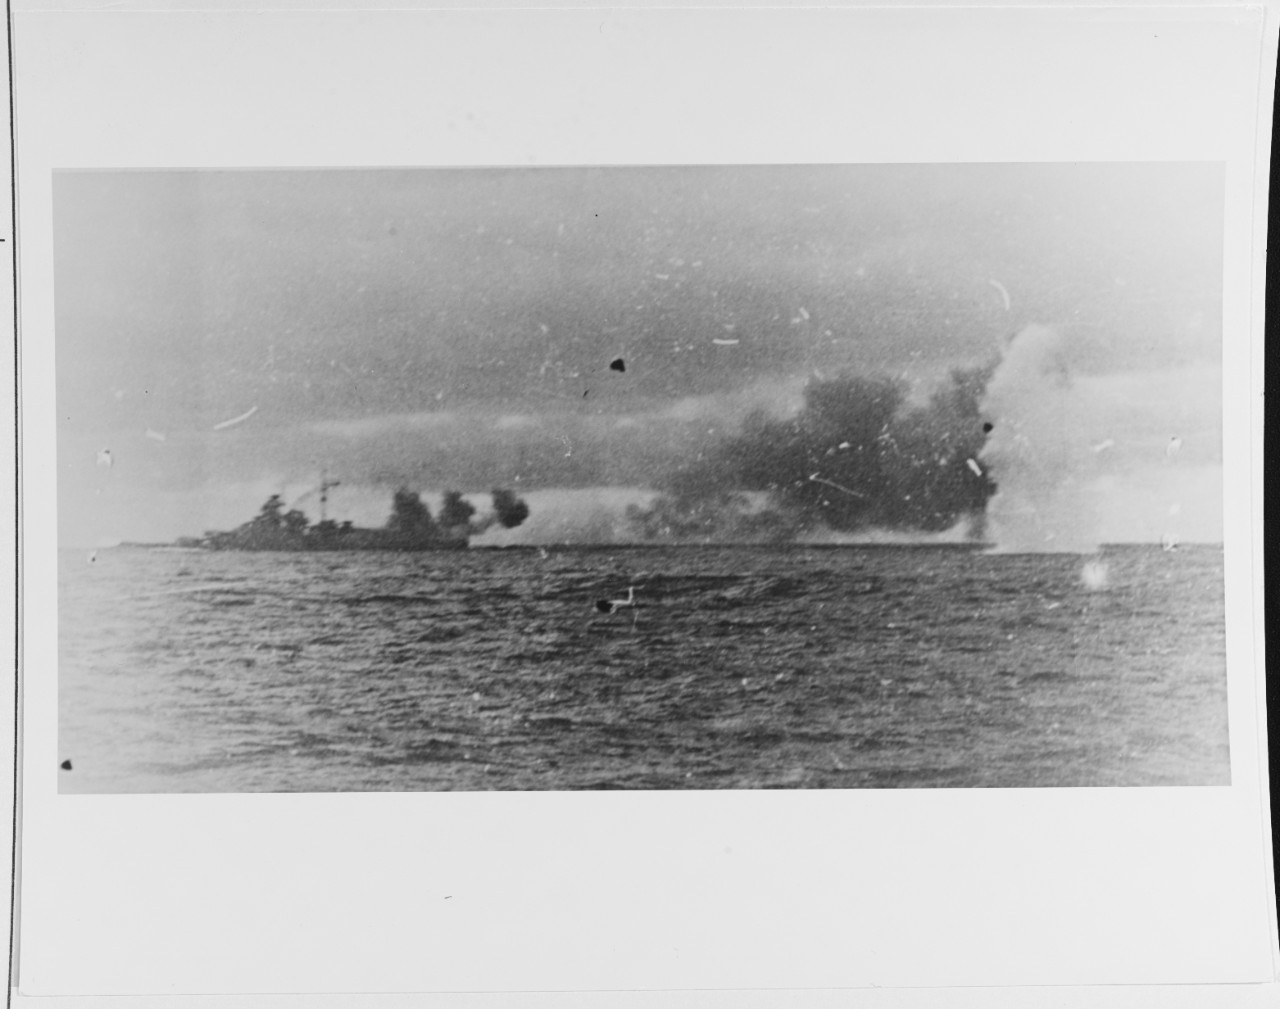 Photo #: NH 69728  Battle of the Denmark Strait, 24 May 1941